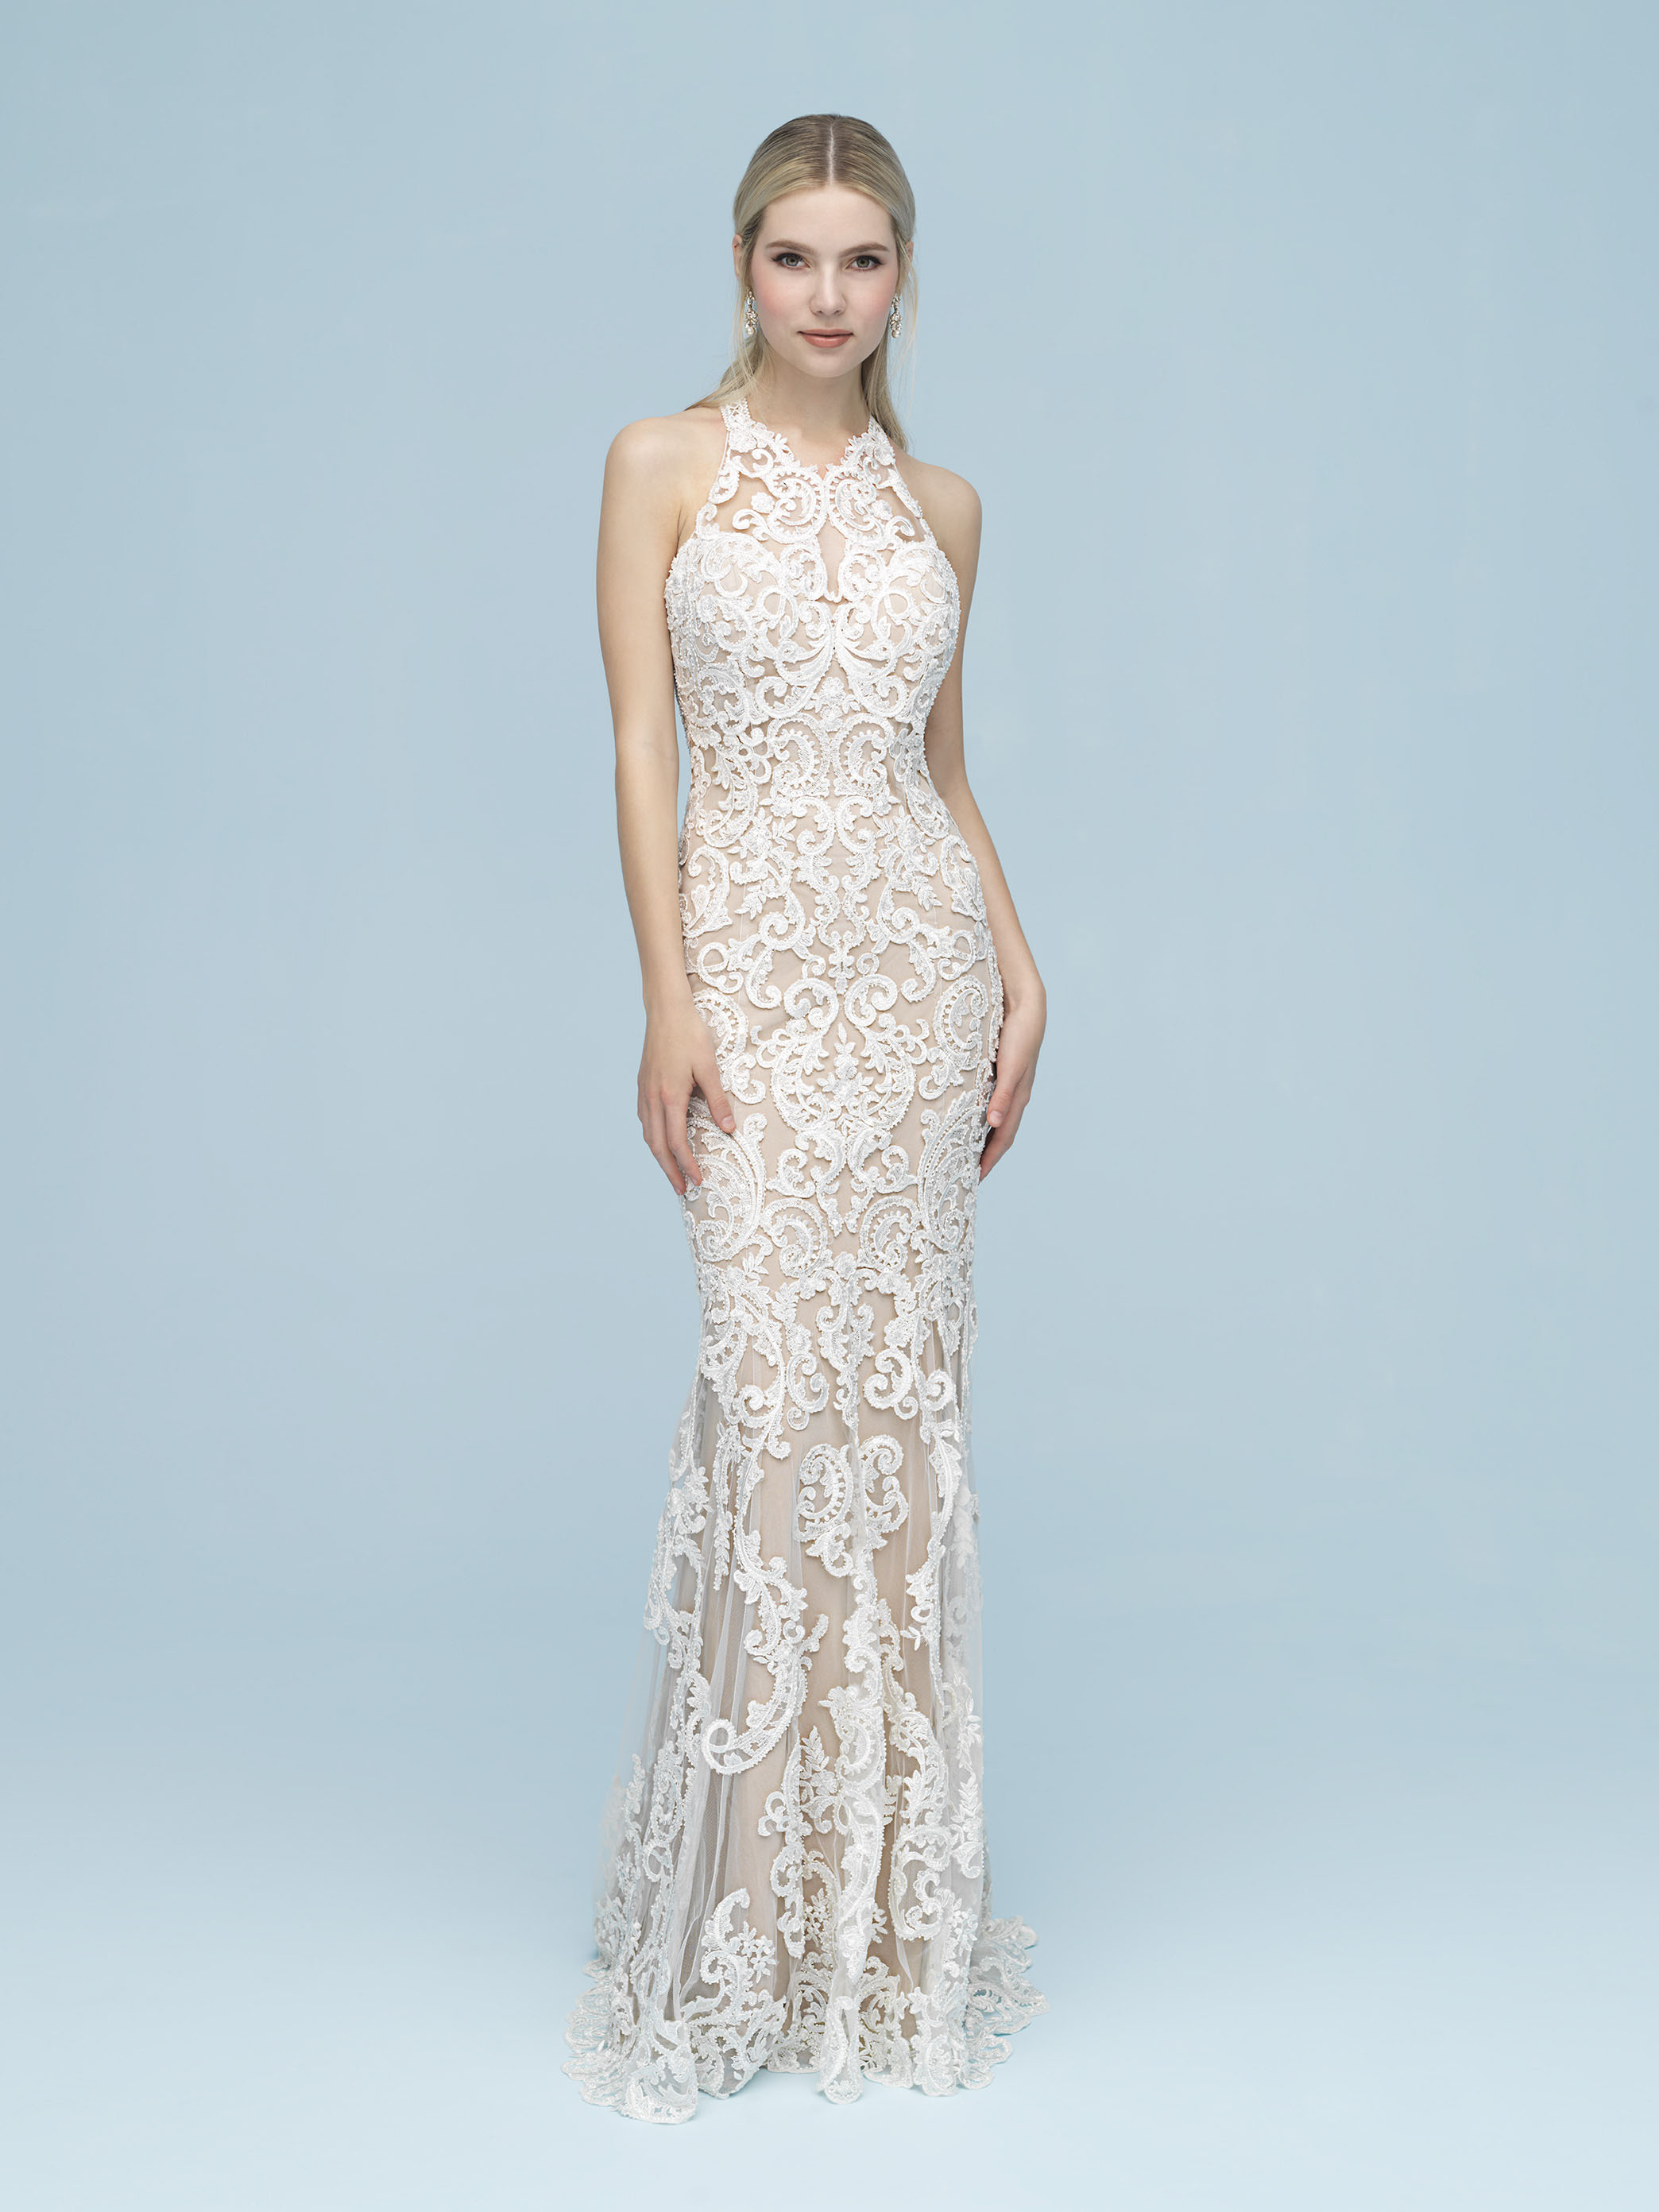 Great Wedding Dresses In Calgary in the world Don t miss out 